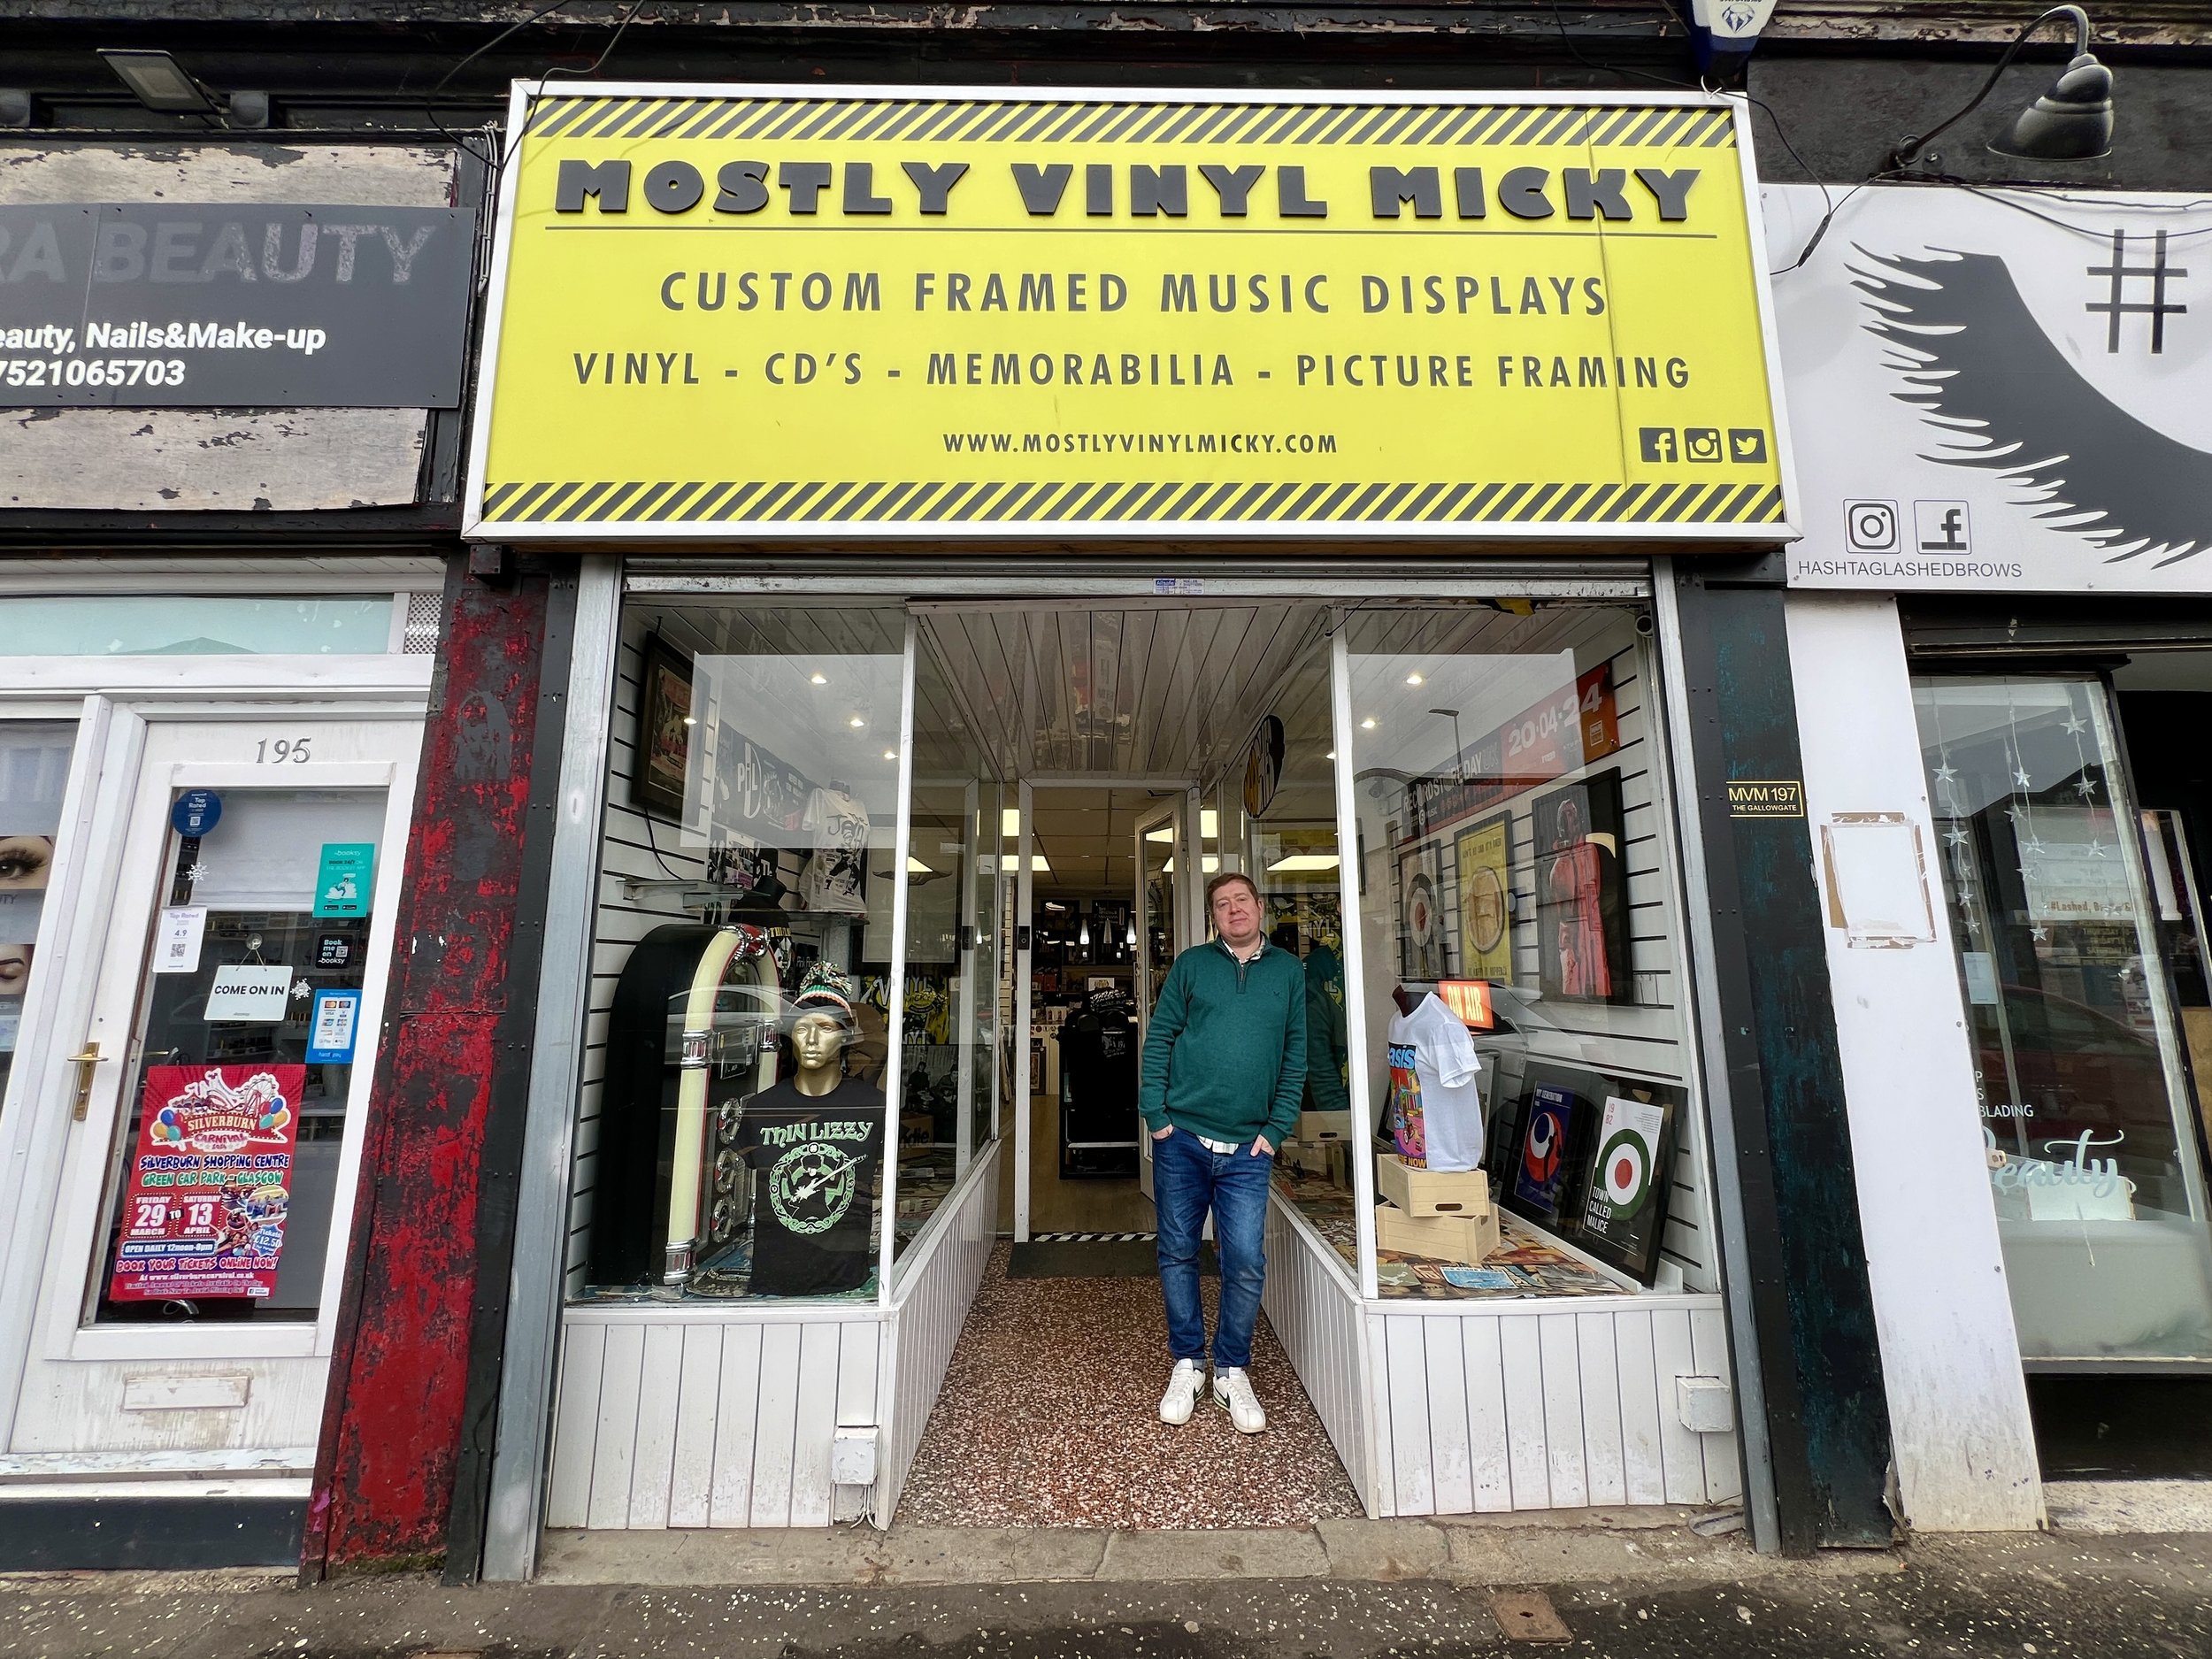 Michael Tague owns Mostly Vinyl Micky in Glasgow's East End